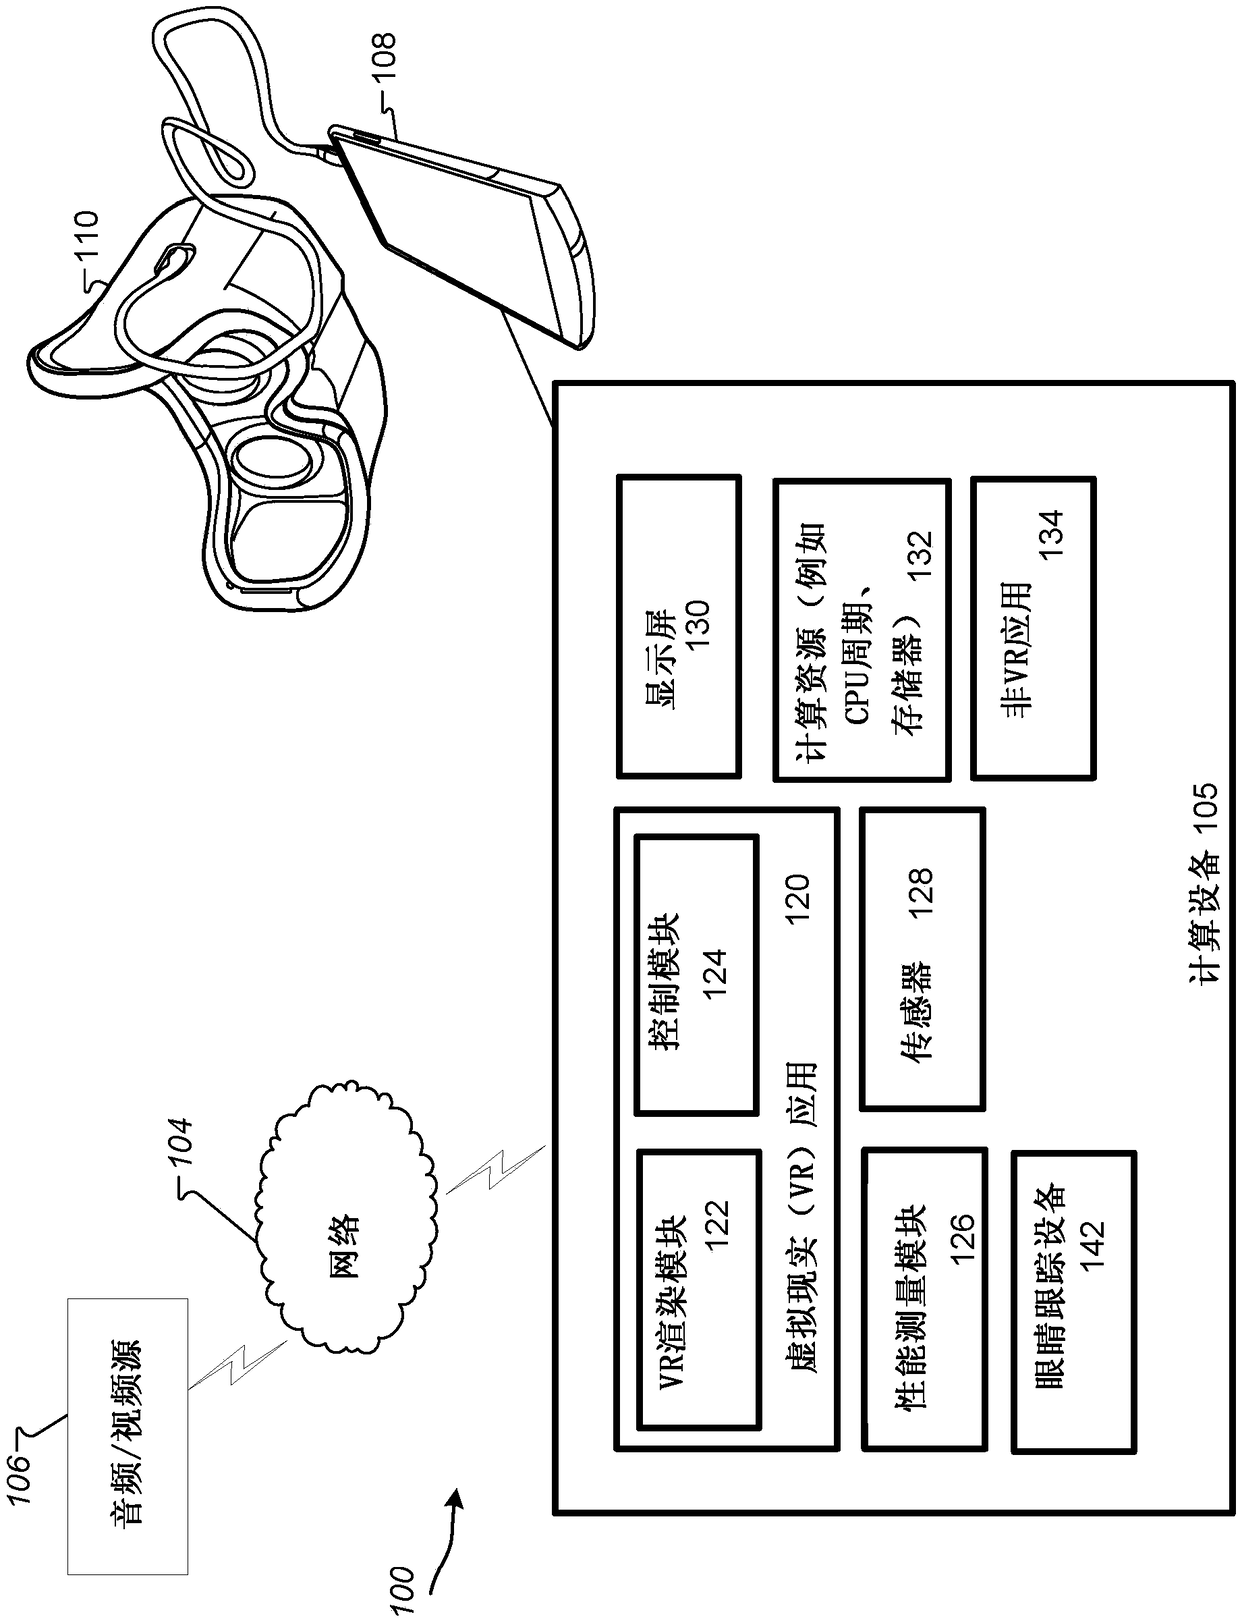 Adjusting video rendering rate of virtual reality content and processing of a stereoscopic image